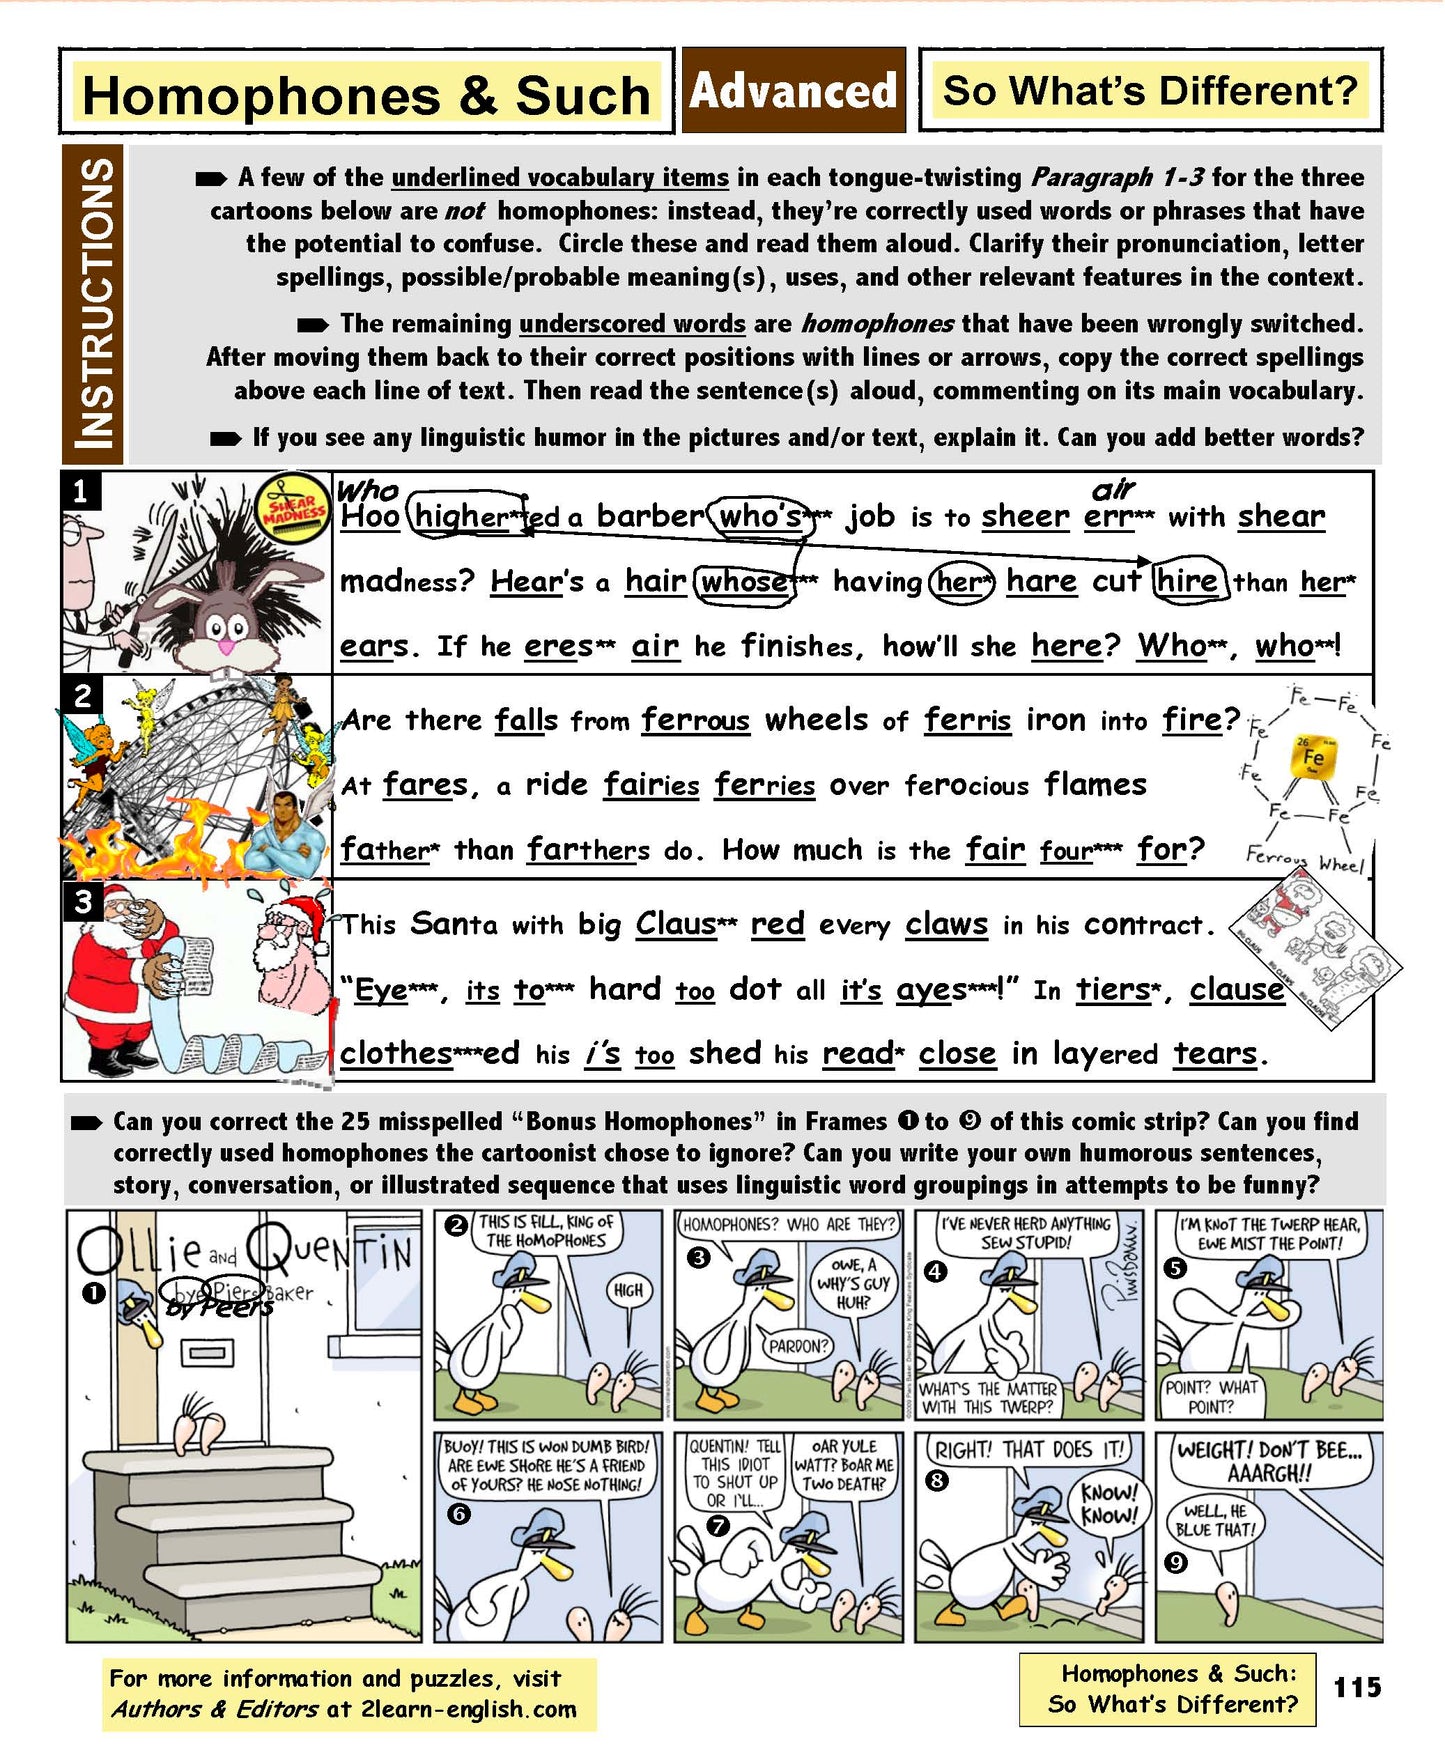 C-05.11 Use Motivating Vocabulary Puzzles as Tools to Teach & Learn Vocabulary.